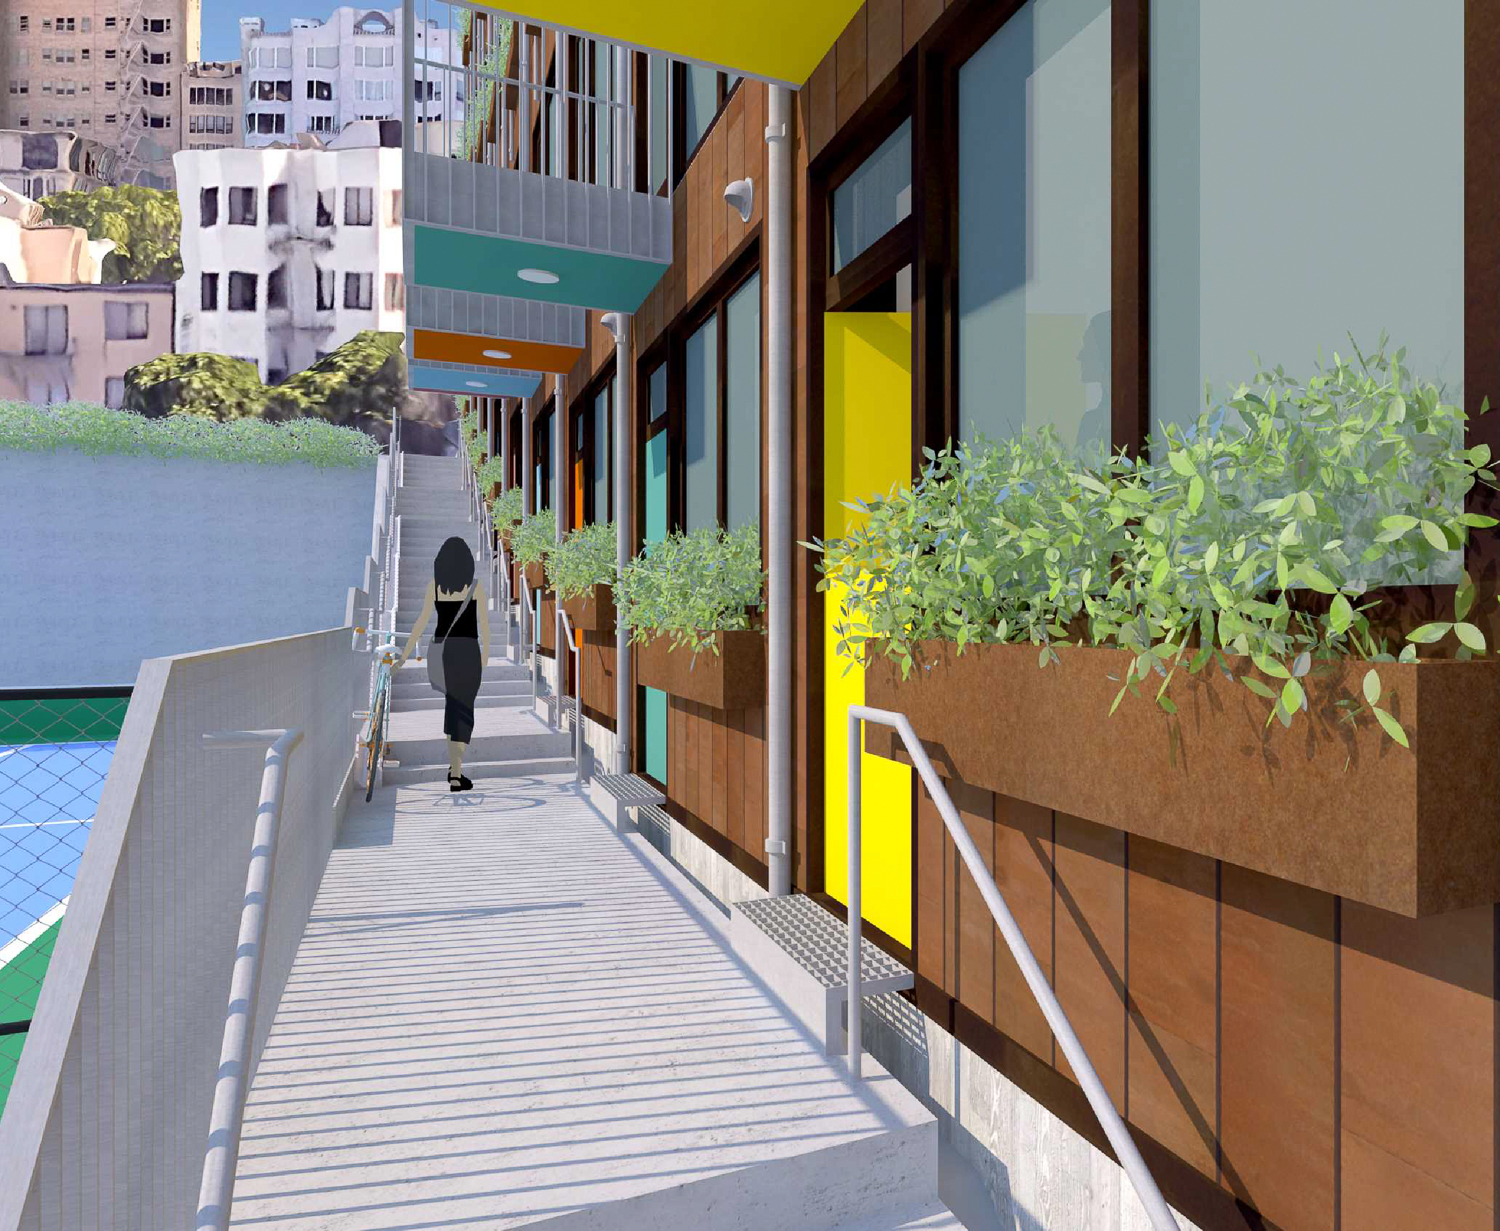 1151 Washington Street resident's entry walkway, rendering by Macy Architecture